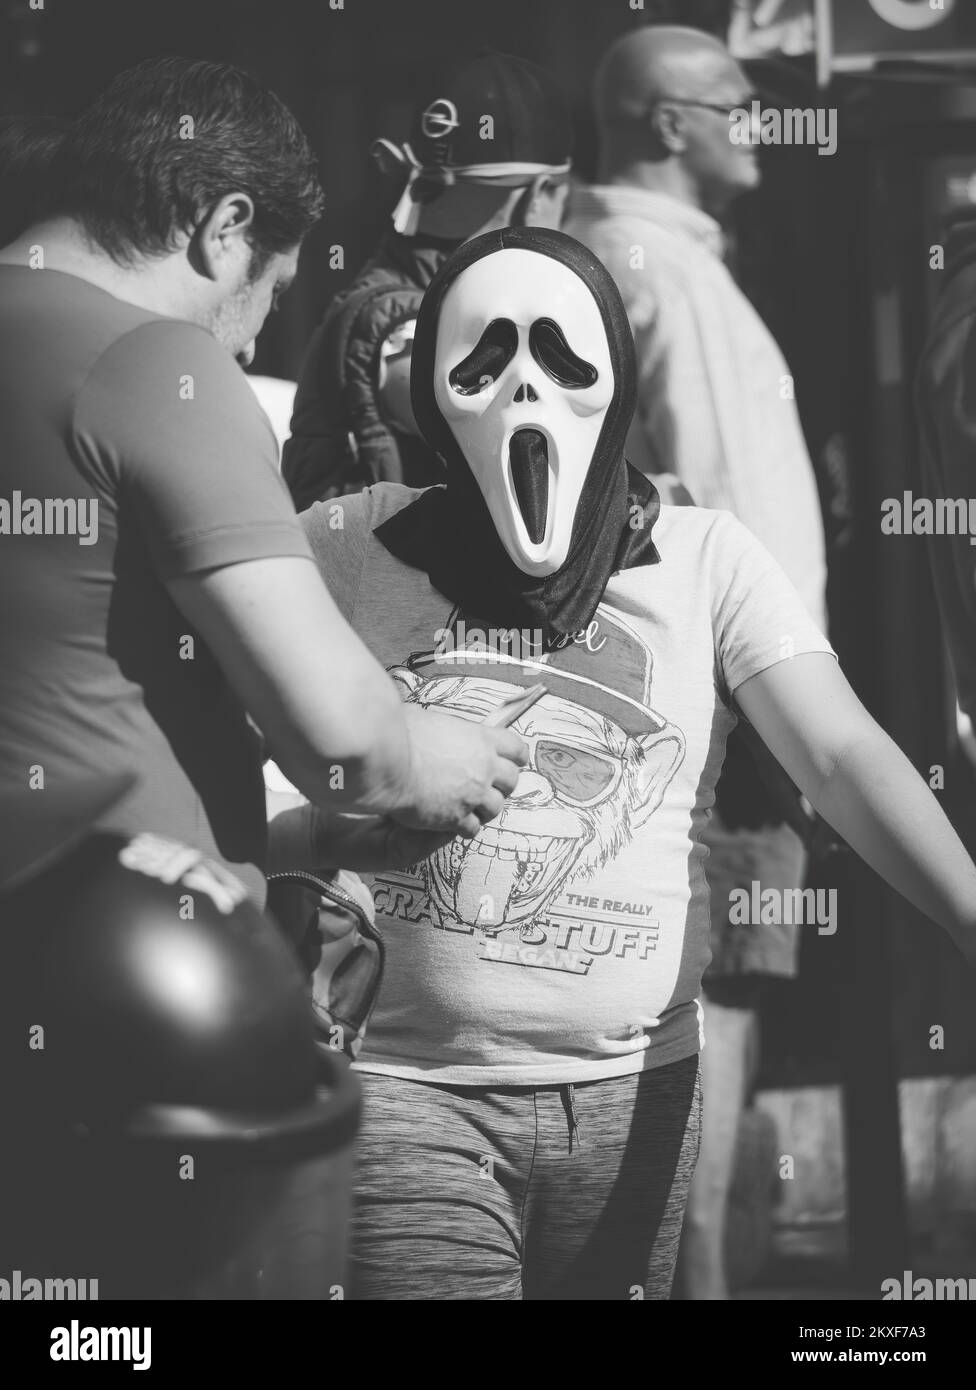 Bucharest, Romania - Man wearing a ghost face scream mask. Street photography in Bucharest. Stock Photo